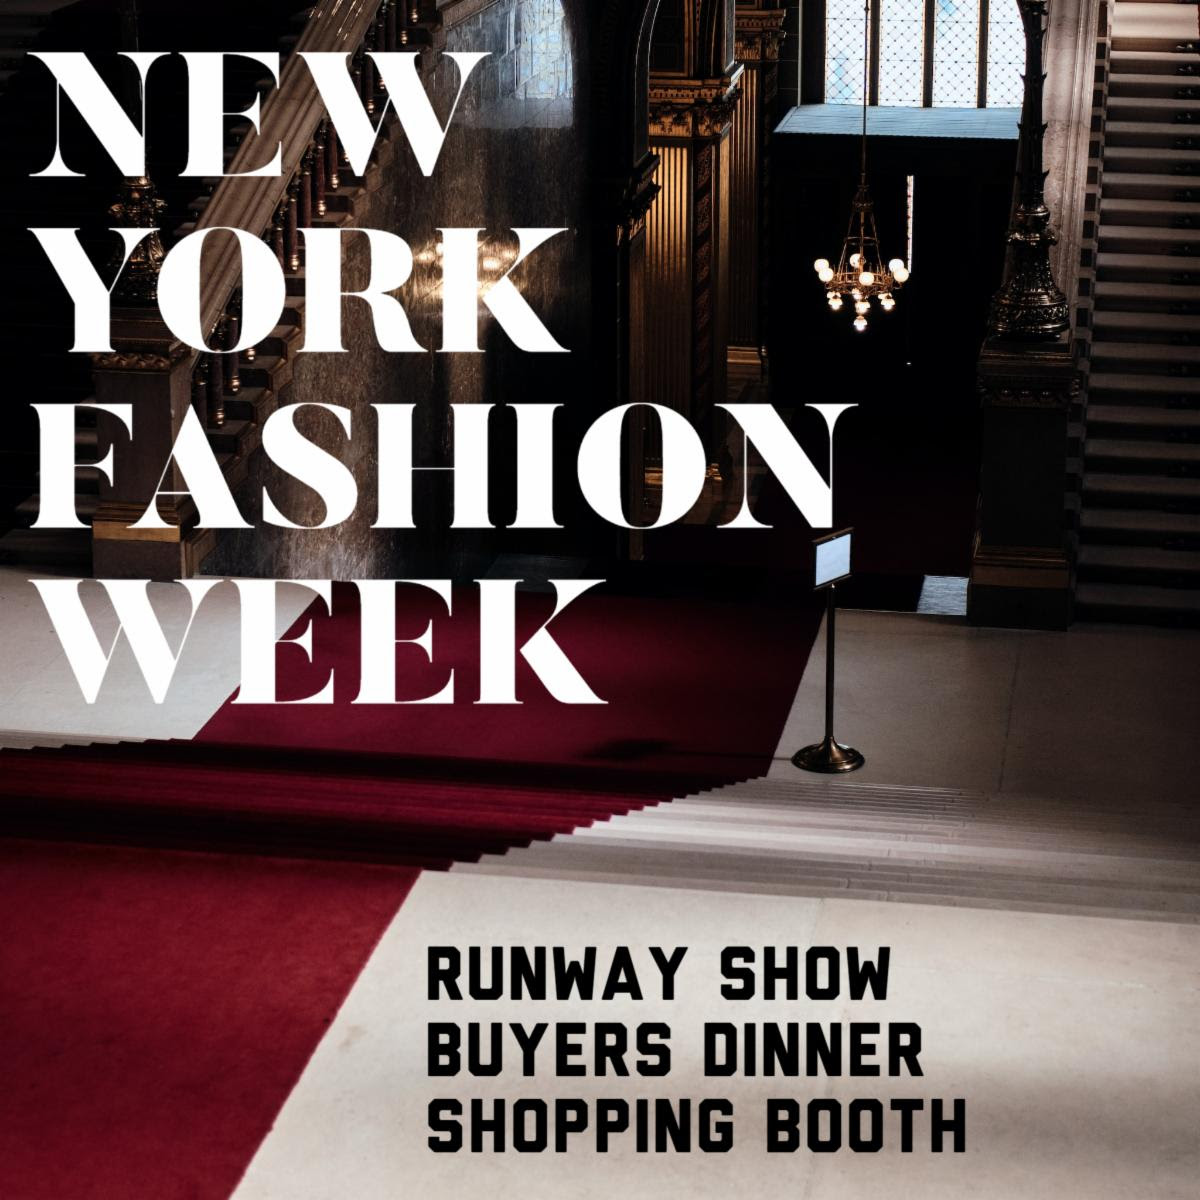 NYFW Buyers Runway Meet Buyers and Show your Collection at NEW YORK